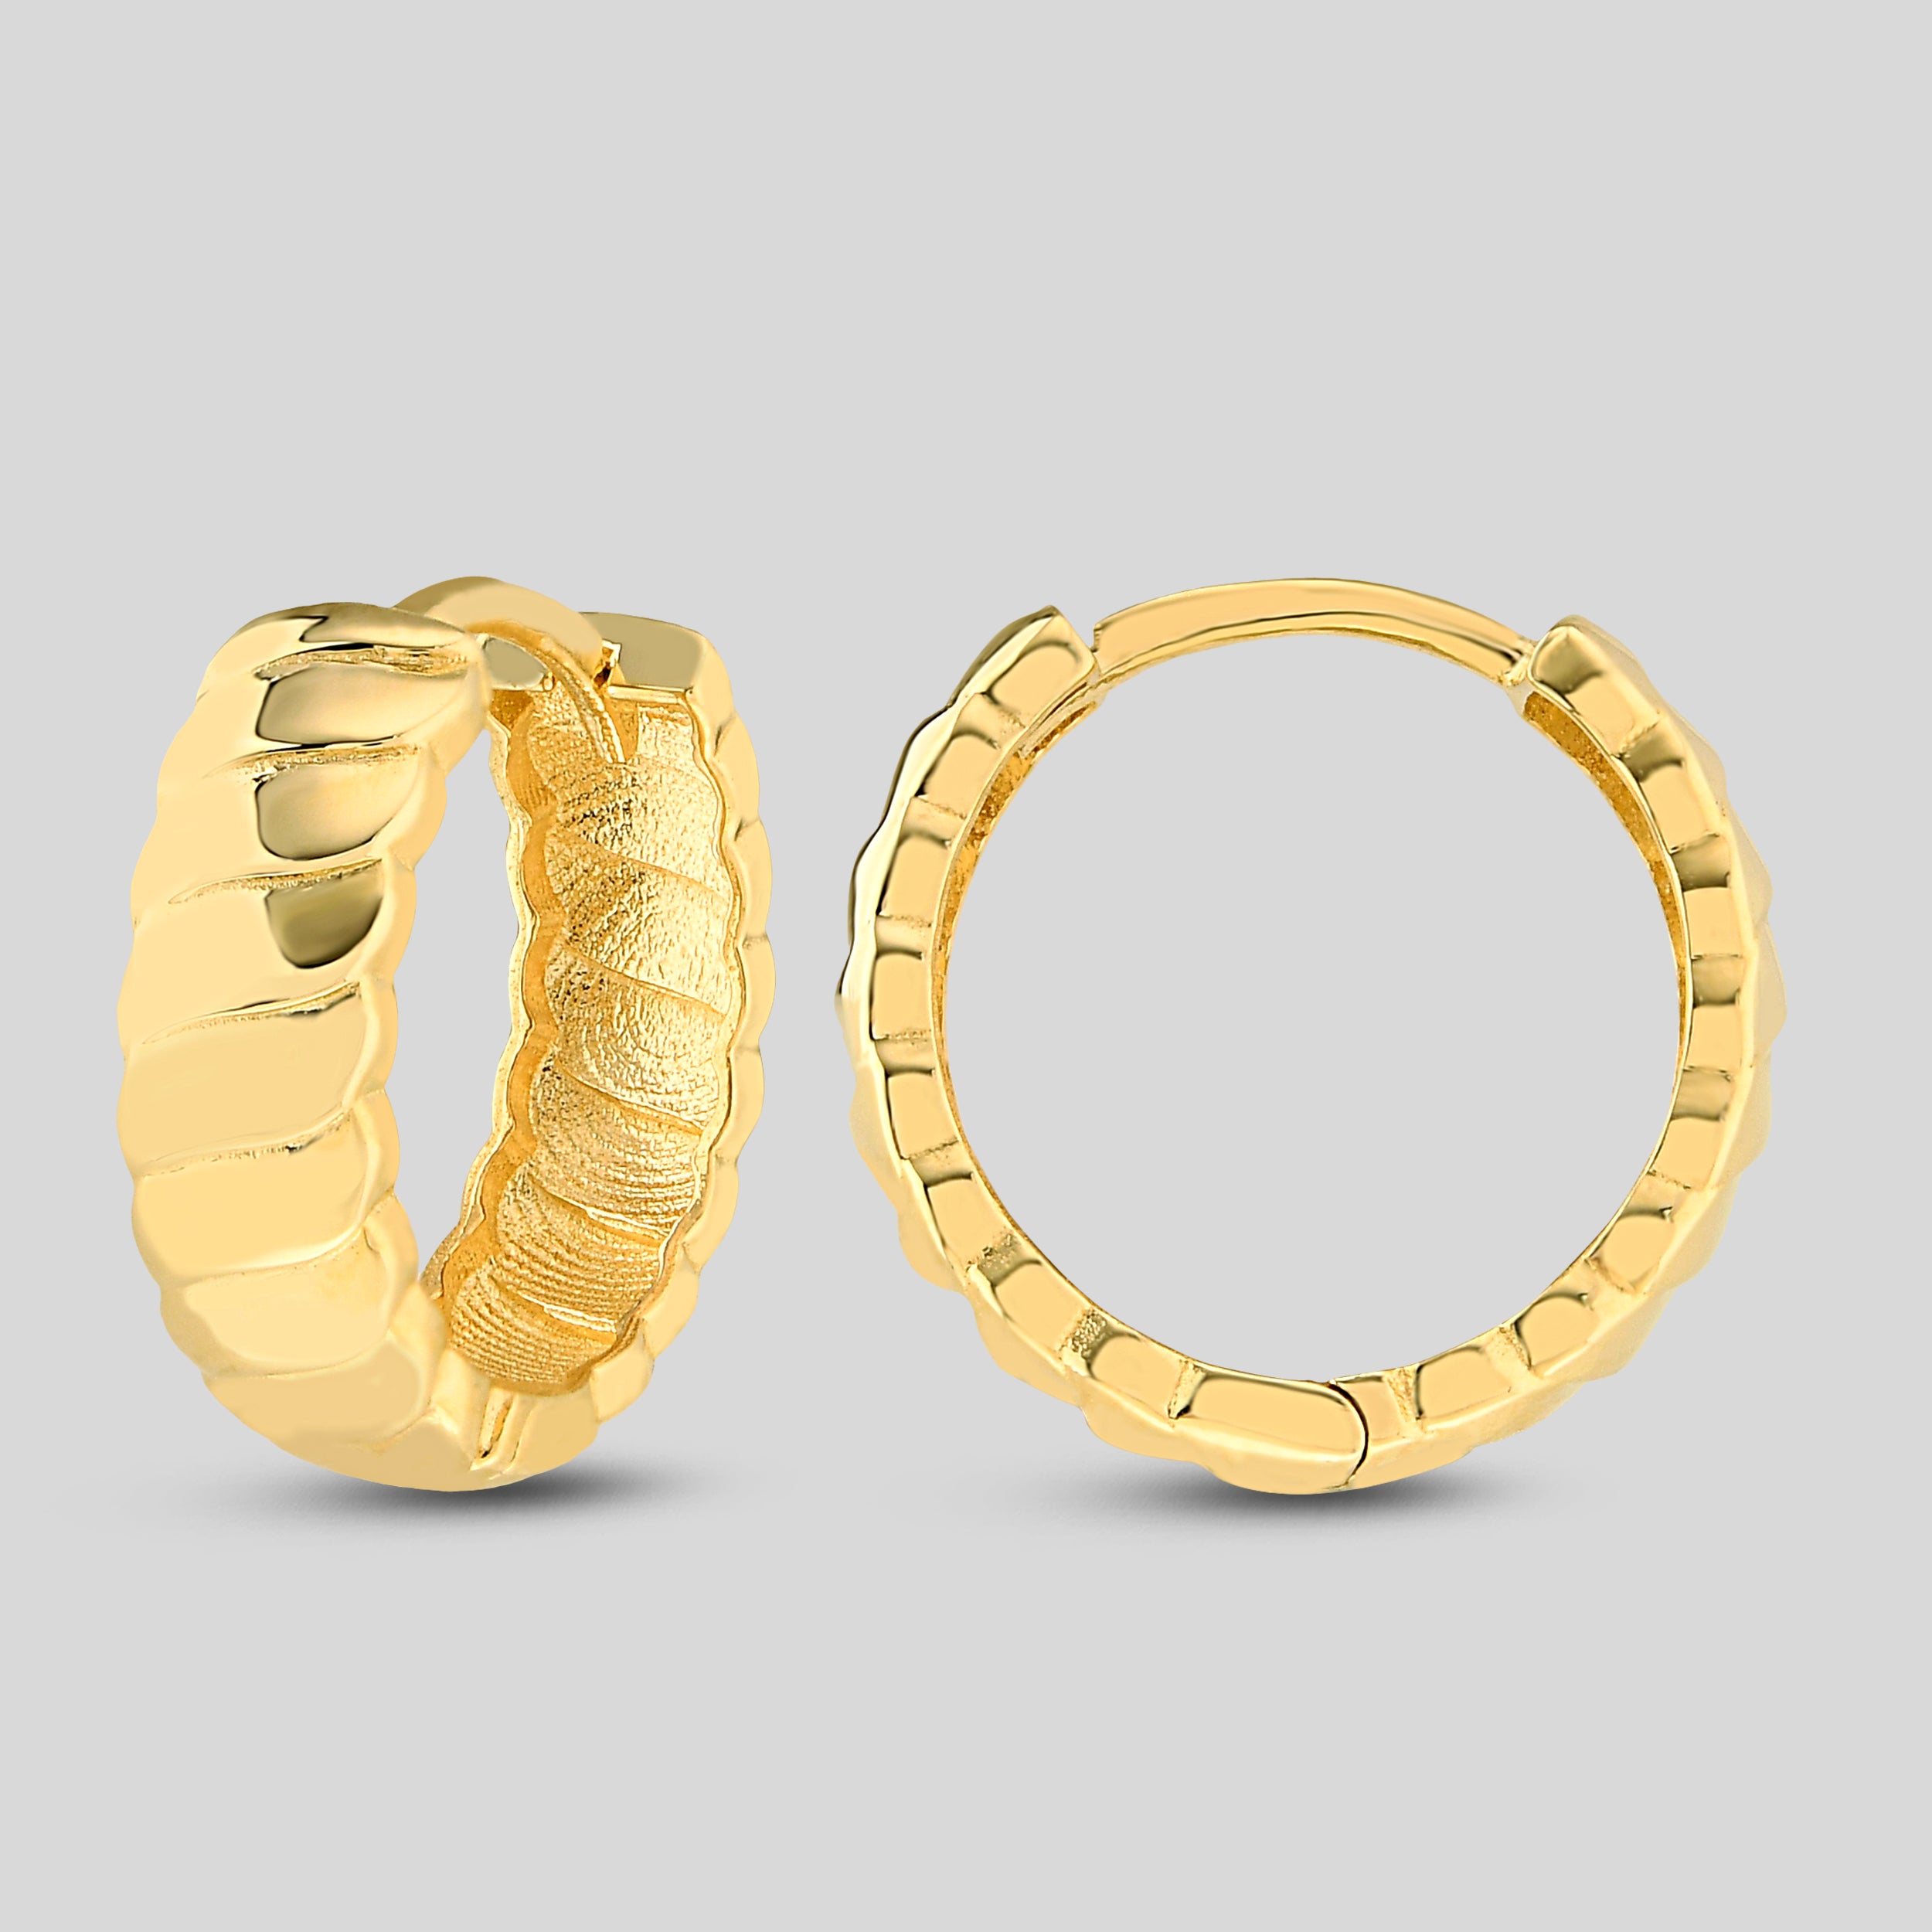 Bold & Twisted Hoops